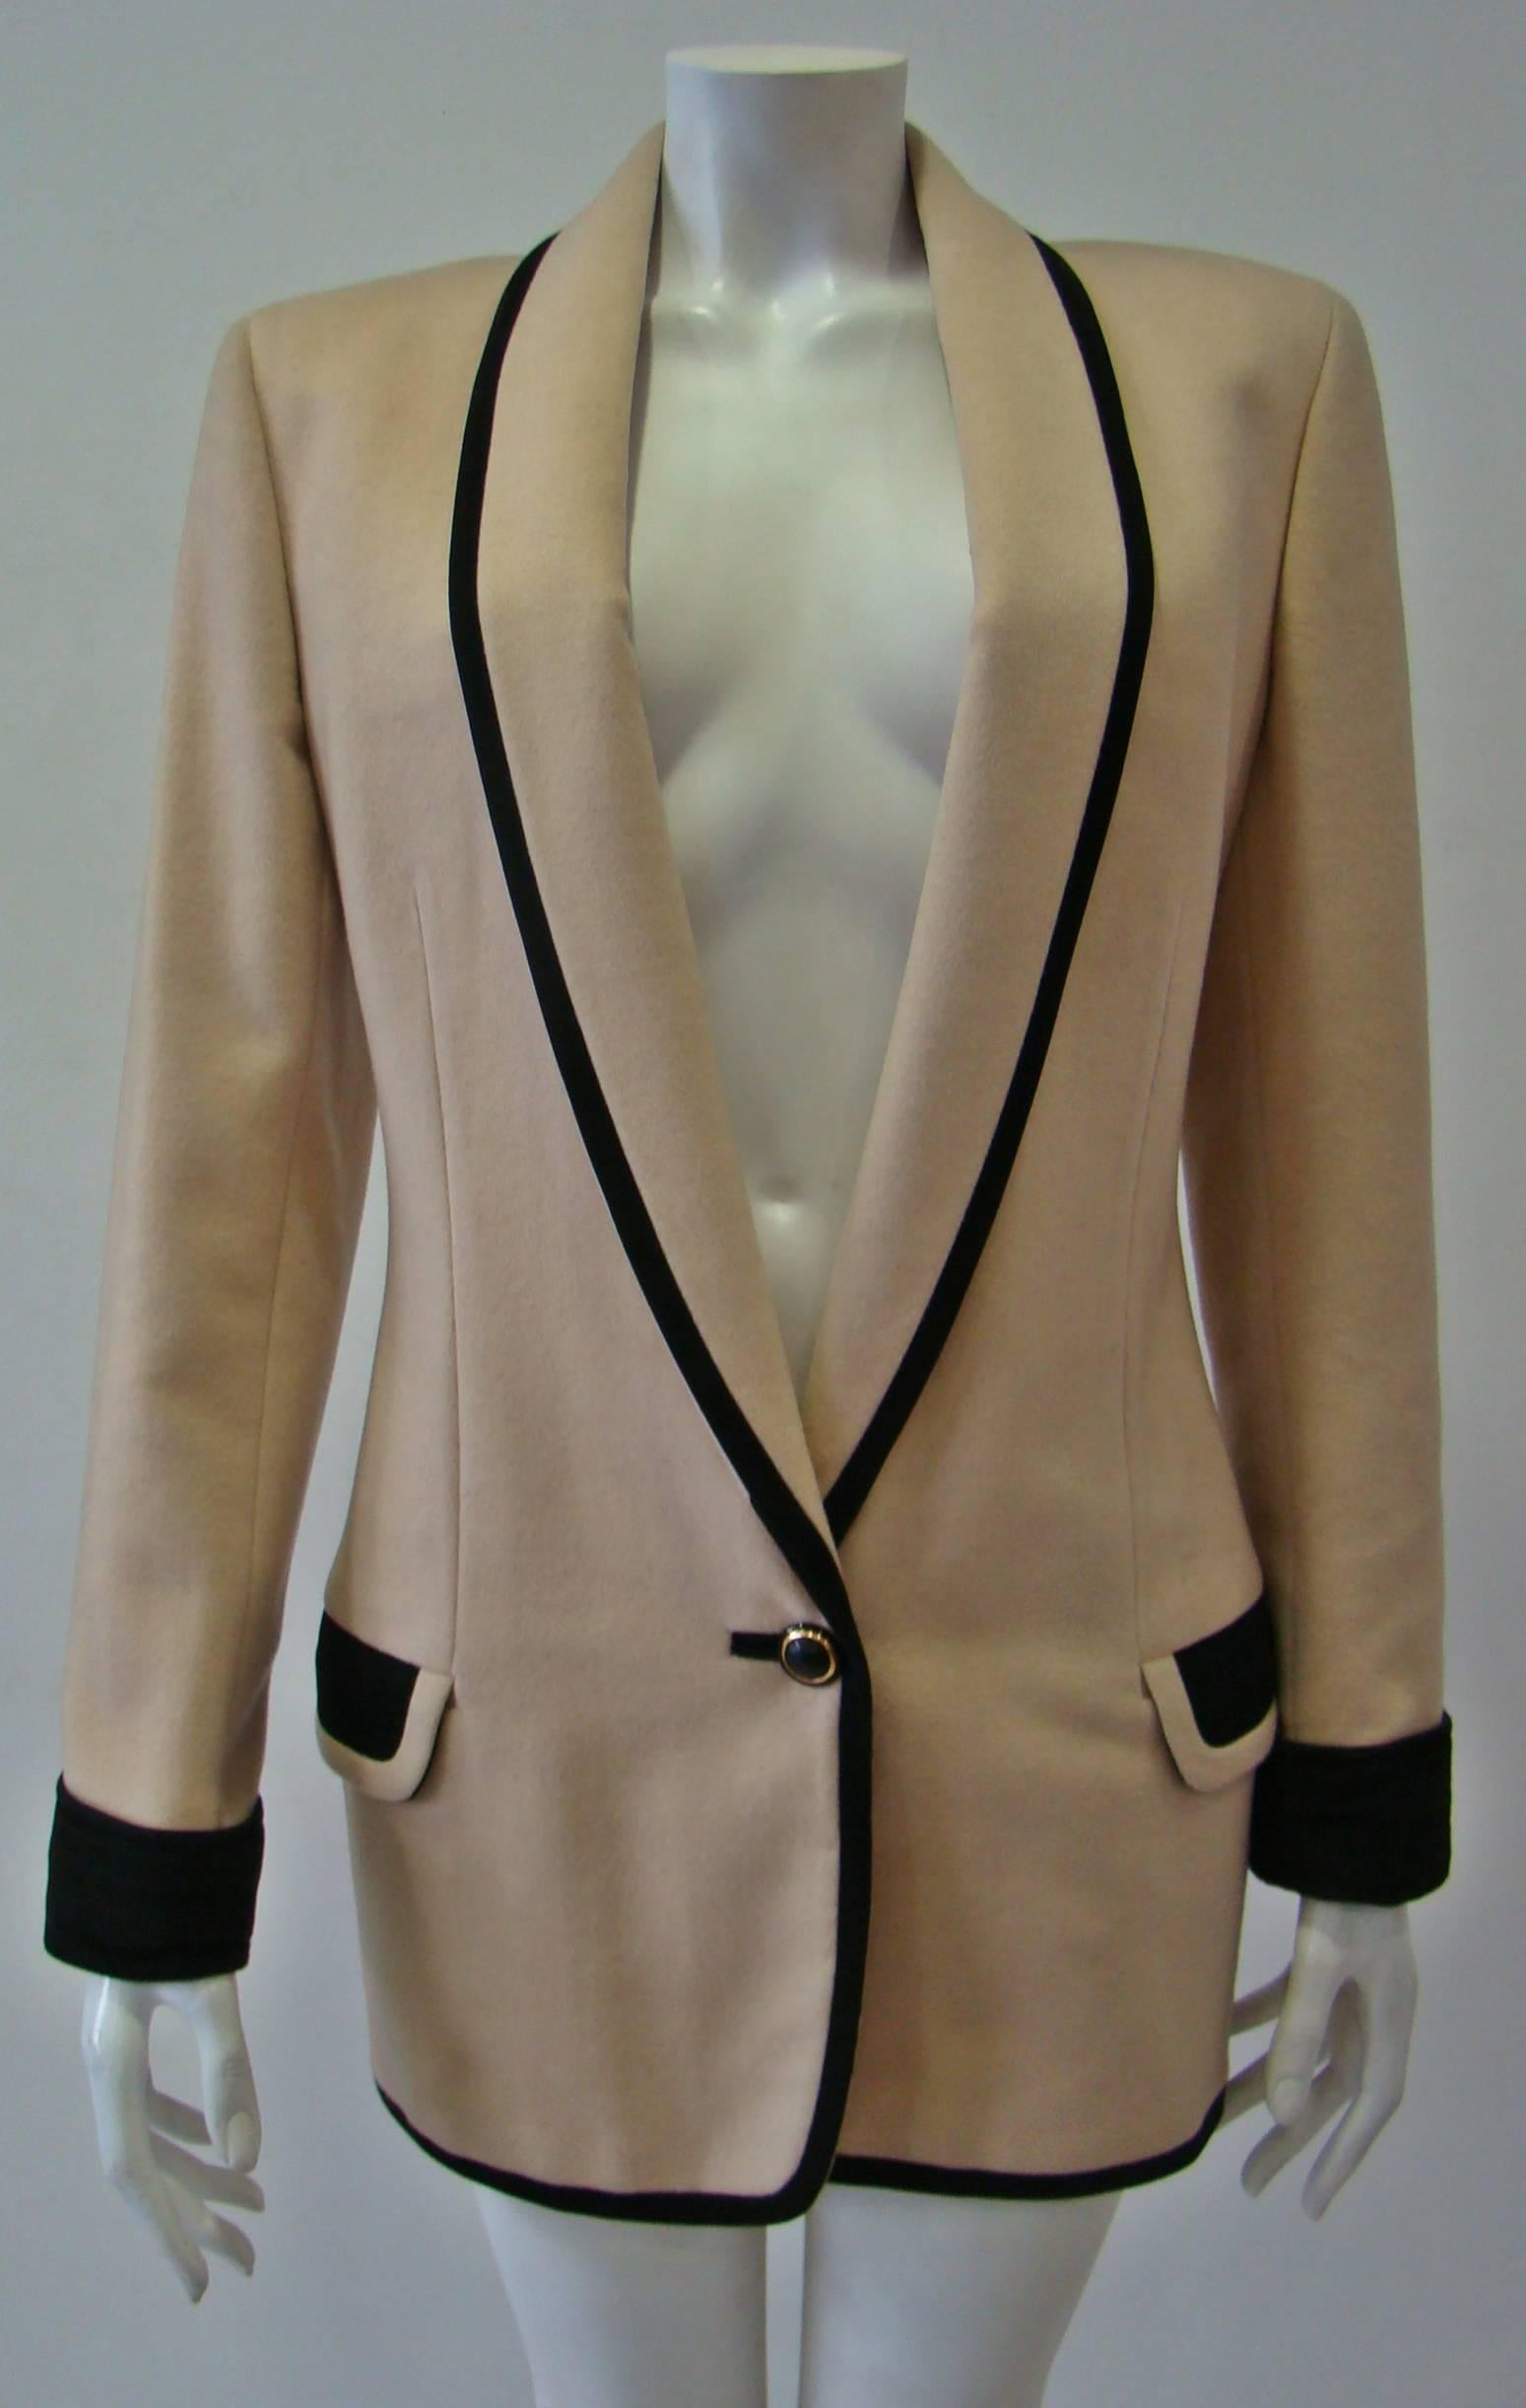 This Unique Piece From Gianni Versace Has Been Tailored To A Mid Length And Is Elevated With Striking Black Trimming In The Sleeves, Pockets And Around The Jacket Which Create An Elegant Look When It Is On. Spun From Warm Wool With Velvety Touch,